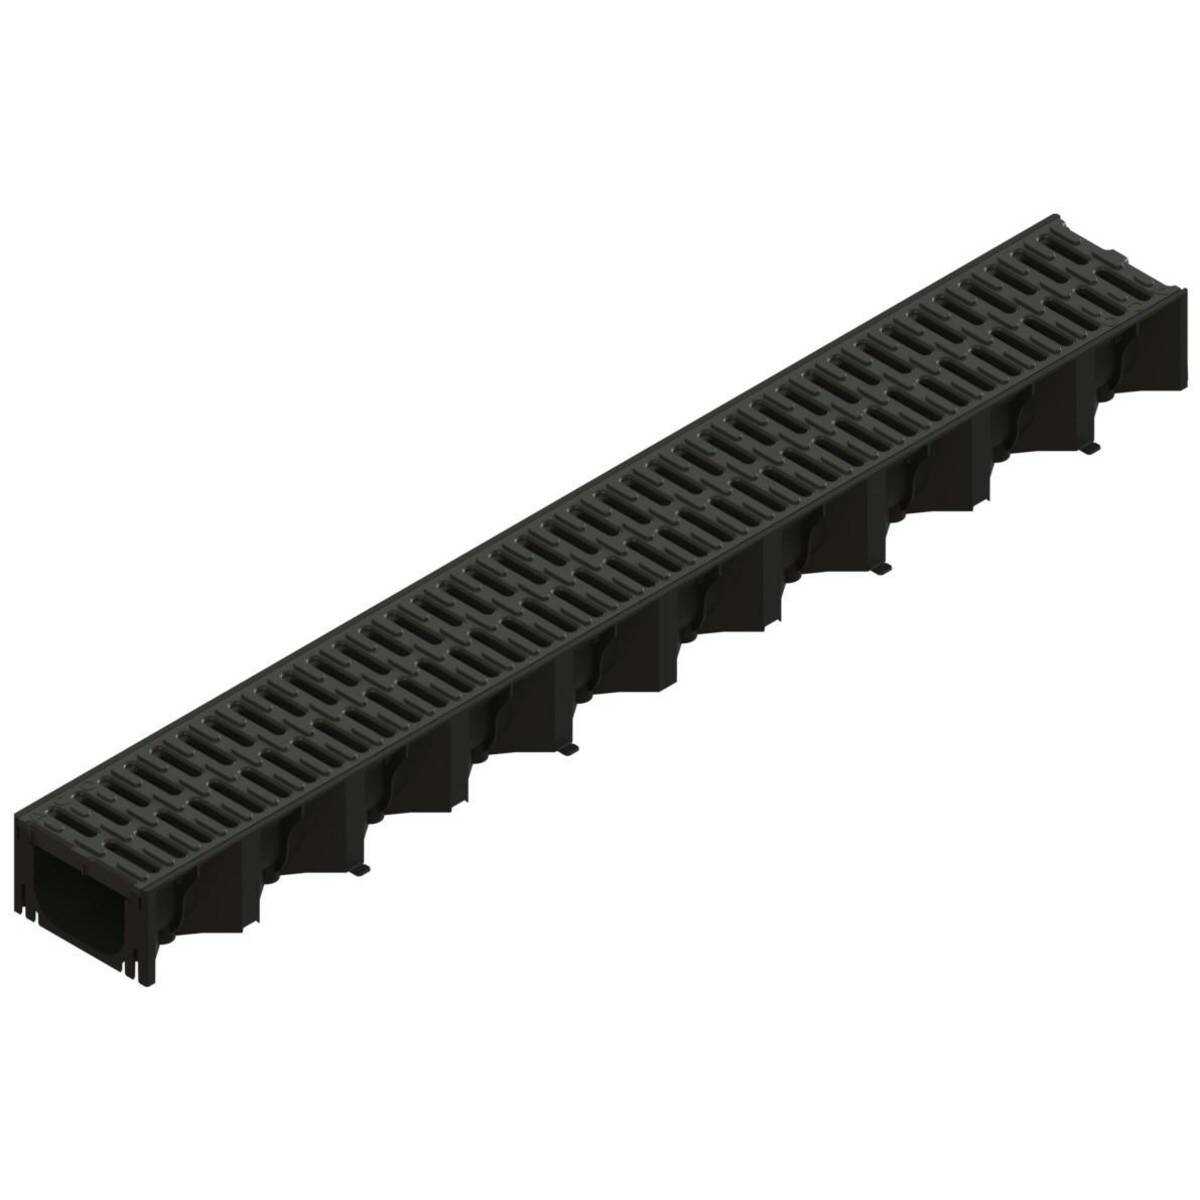 ACO HEXALINE PP GRILLE PASSERELLE PP MICROGRIP A15